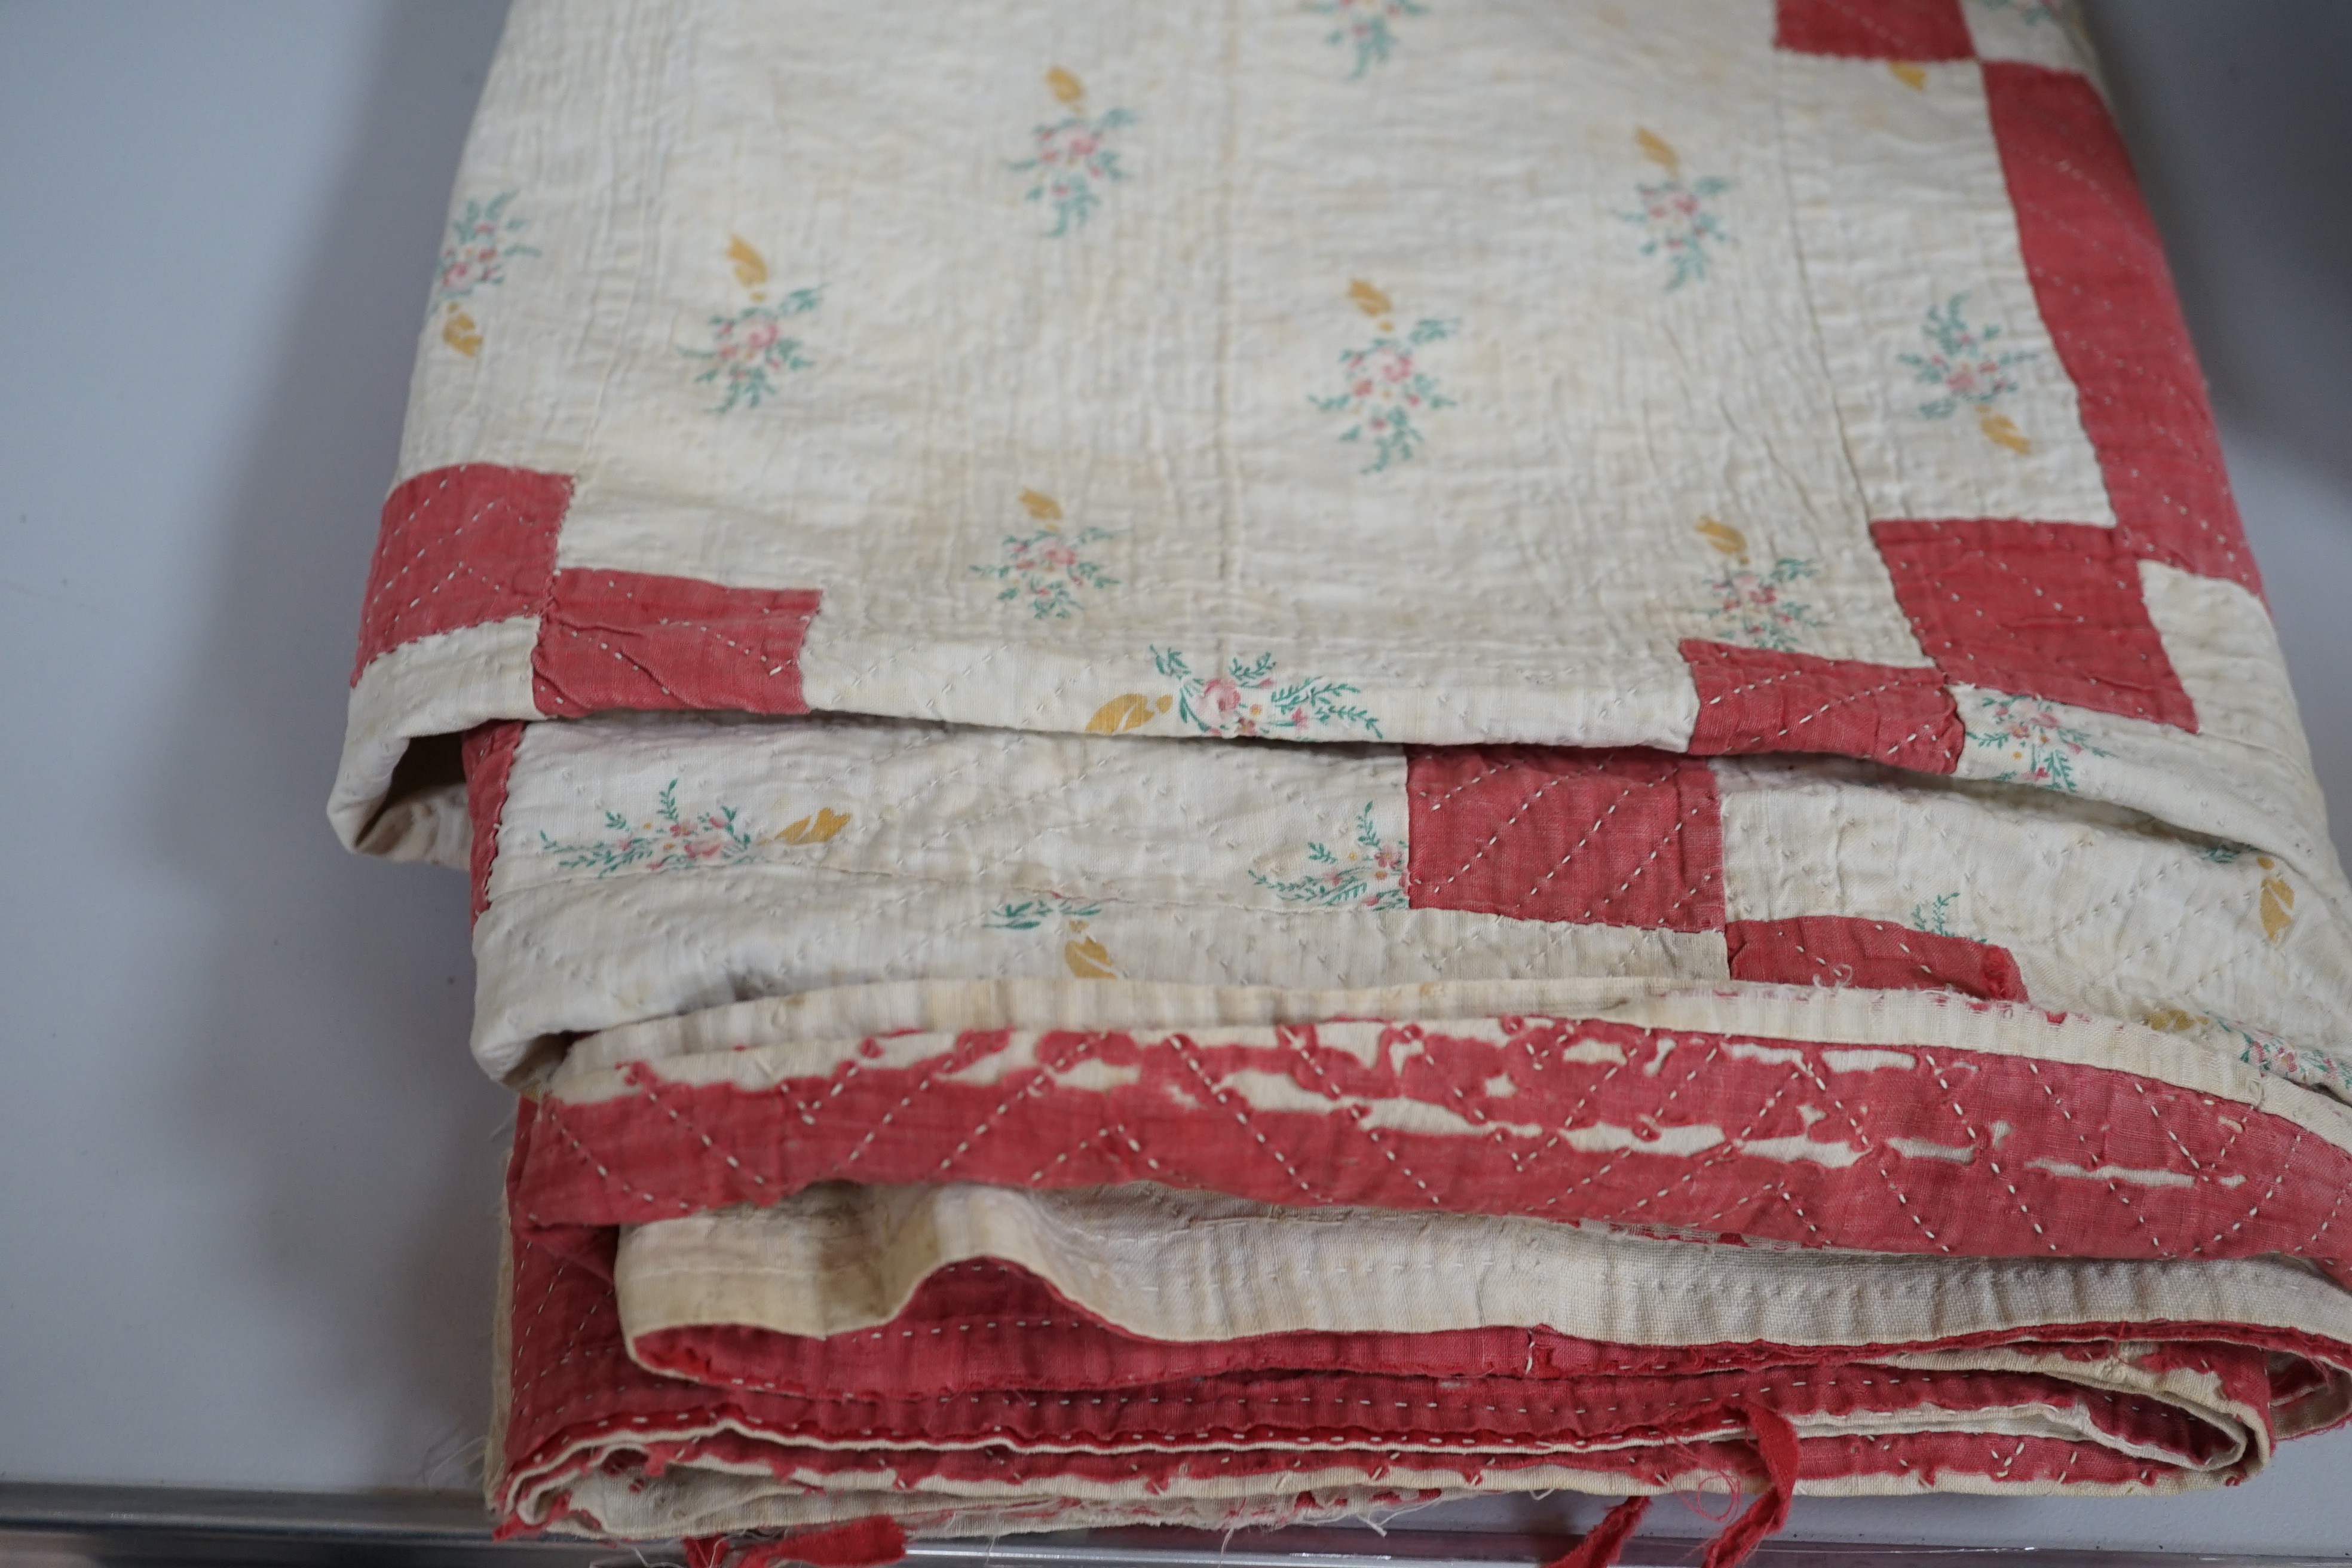 A mid to late 19th century hand stitched patch worked quilt, 210 cms x 200 cms